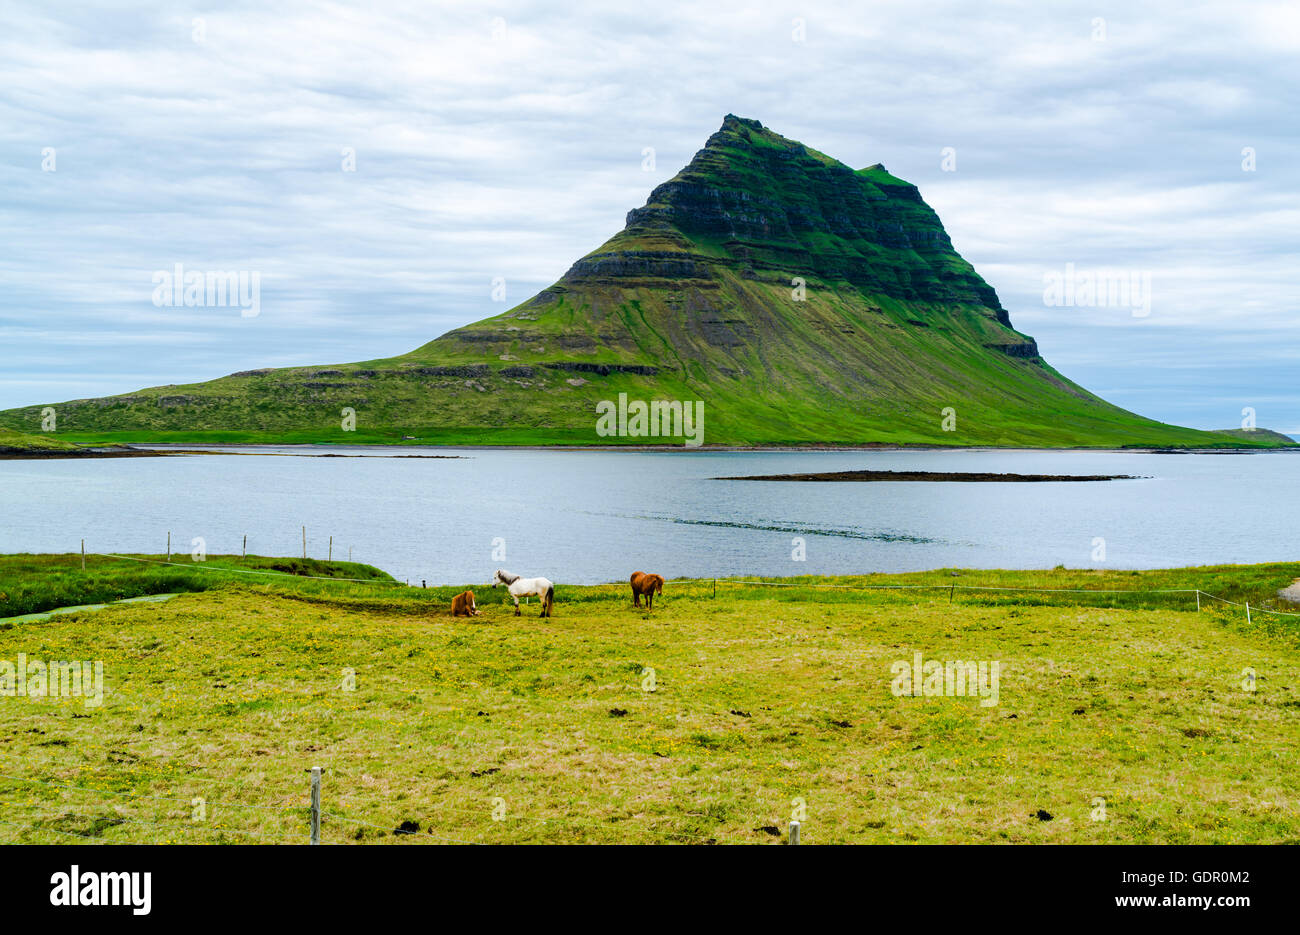 View of mount Kirkjufell with horses grazing in the field near the town of Grundarfjorour, Iceland Stock Photo